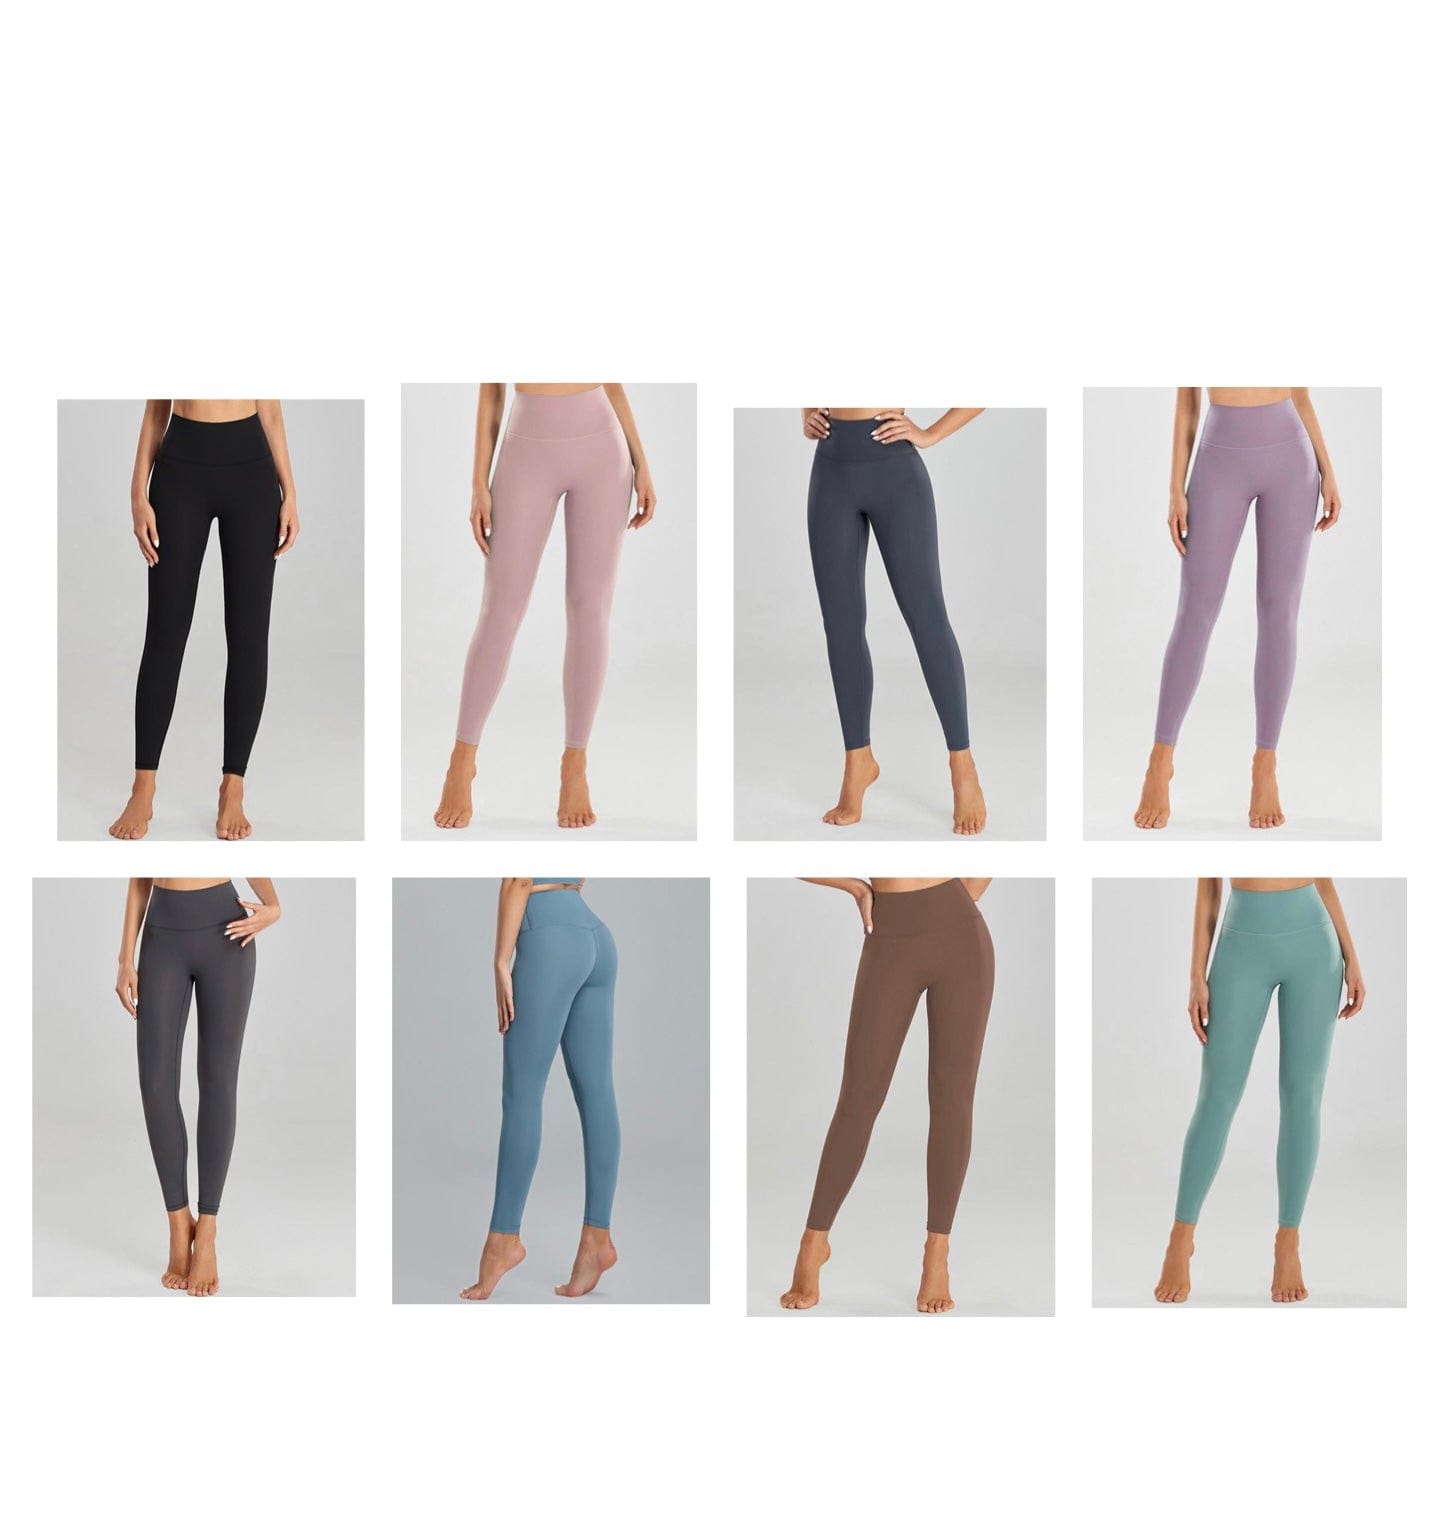 Everyday/ Curves seamless high compression leggings (sizing up to 3XL) - size up